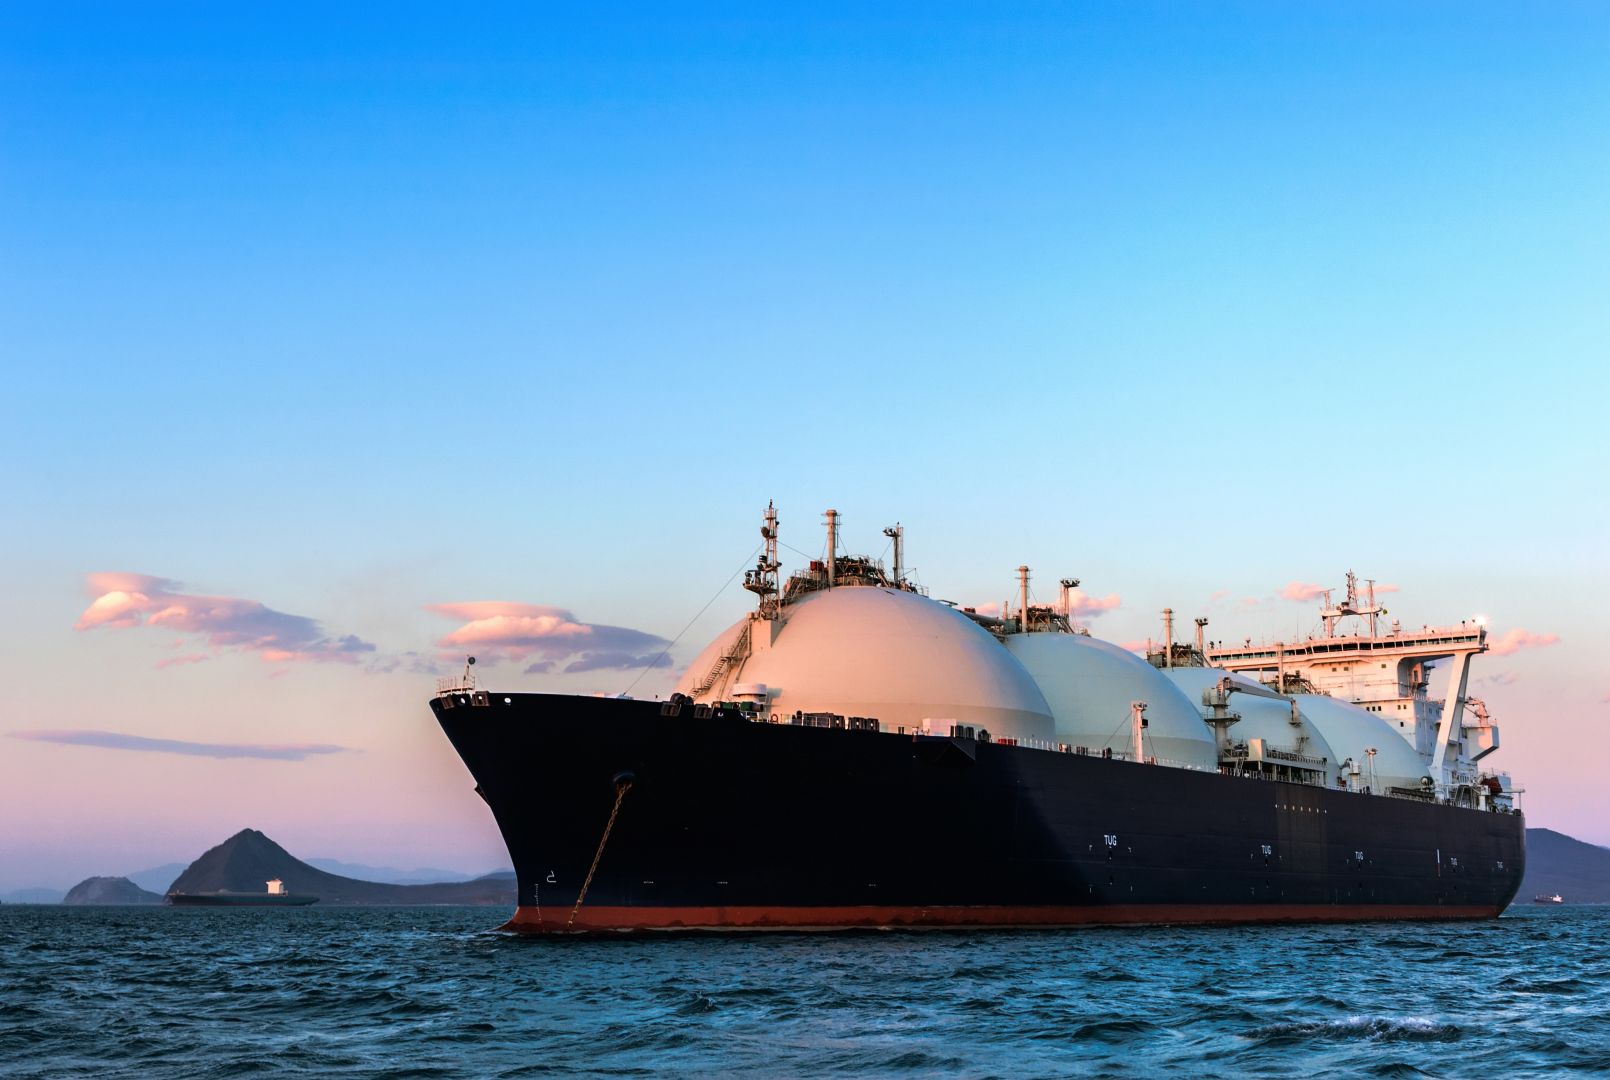 Annual LNG imports into Europe to increase to their highest level on record